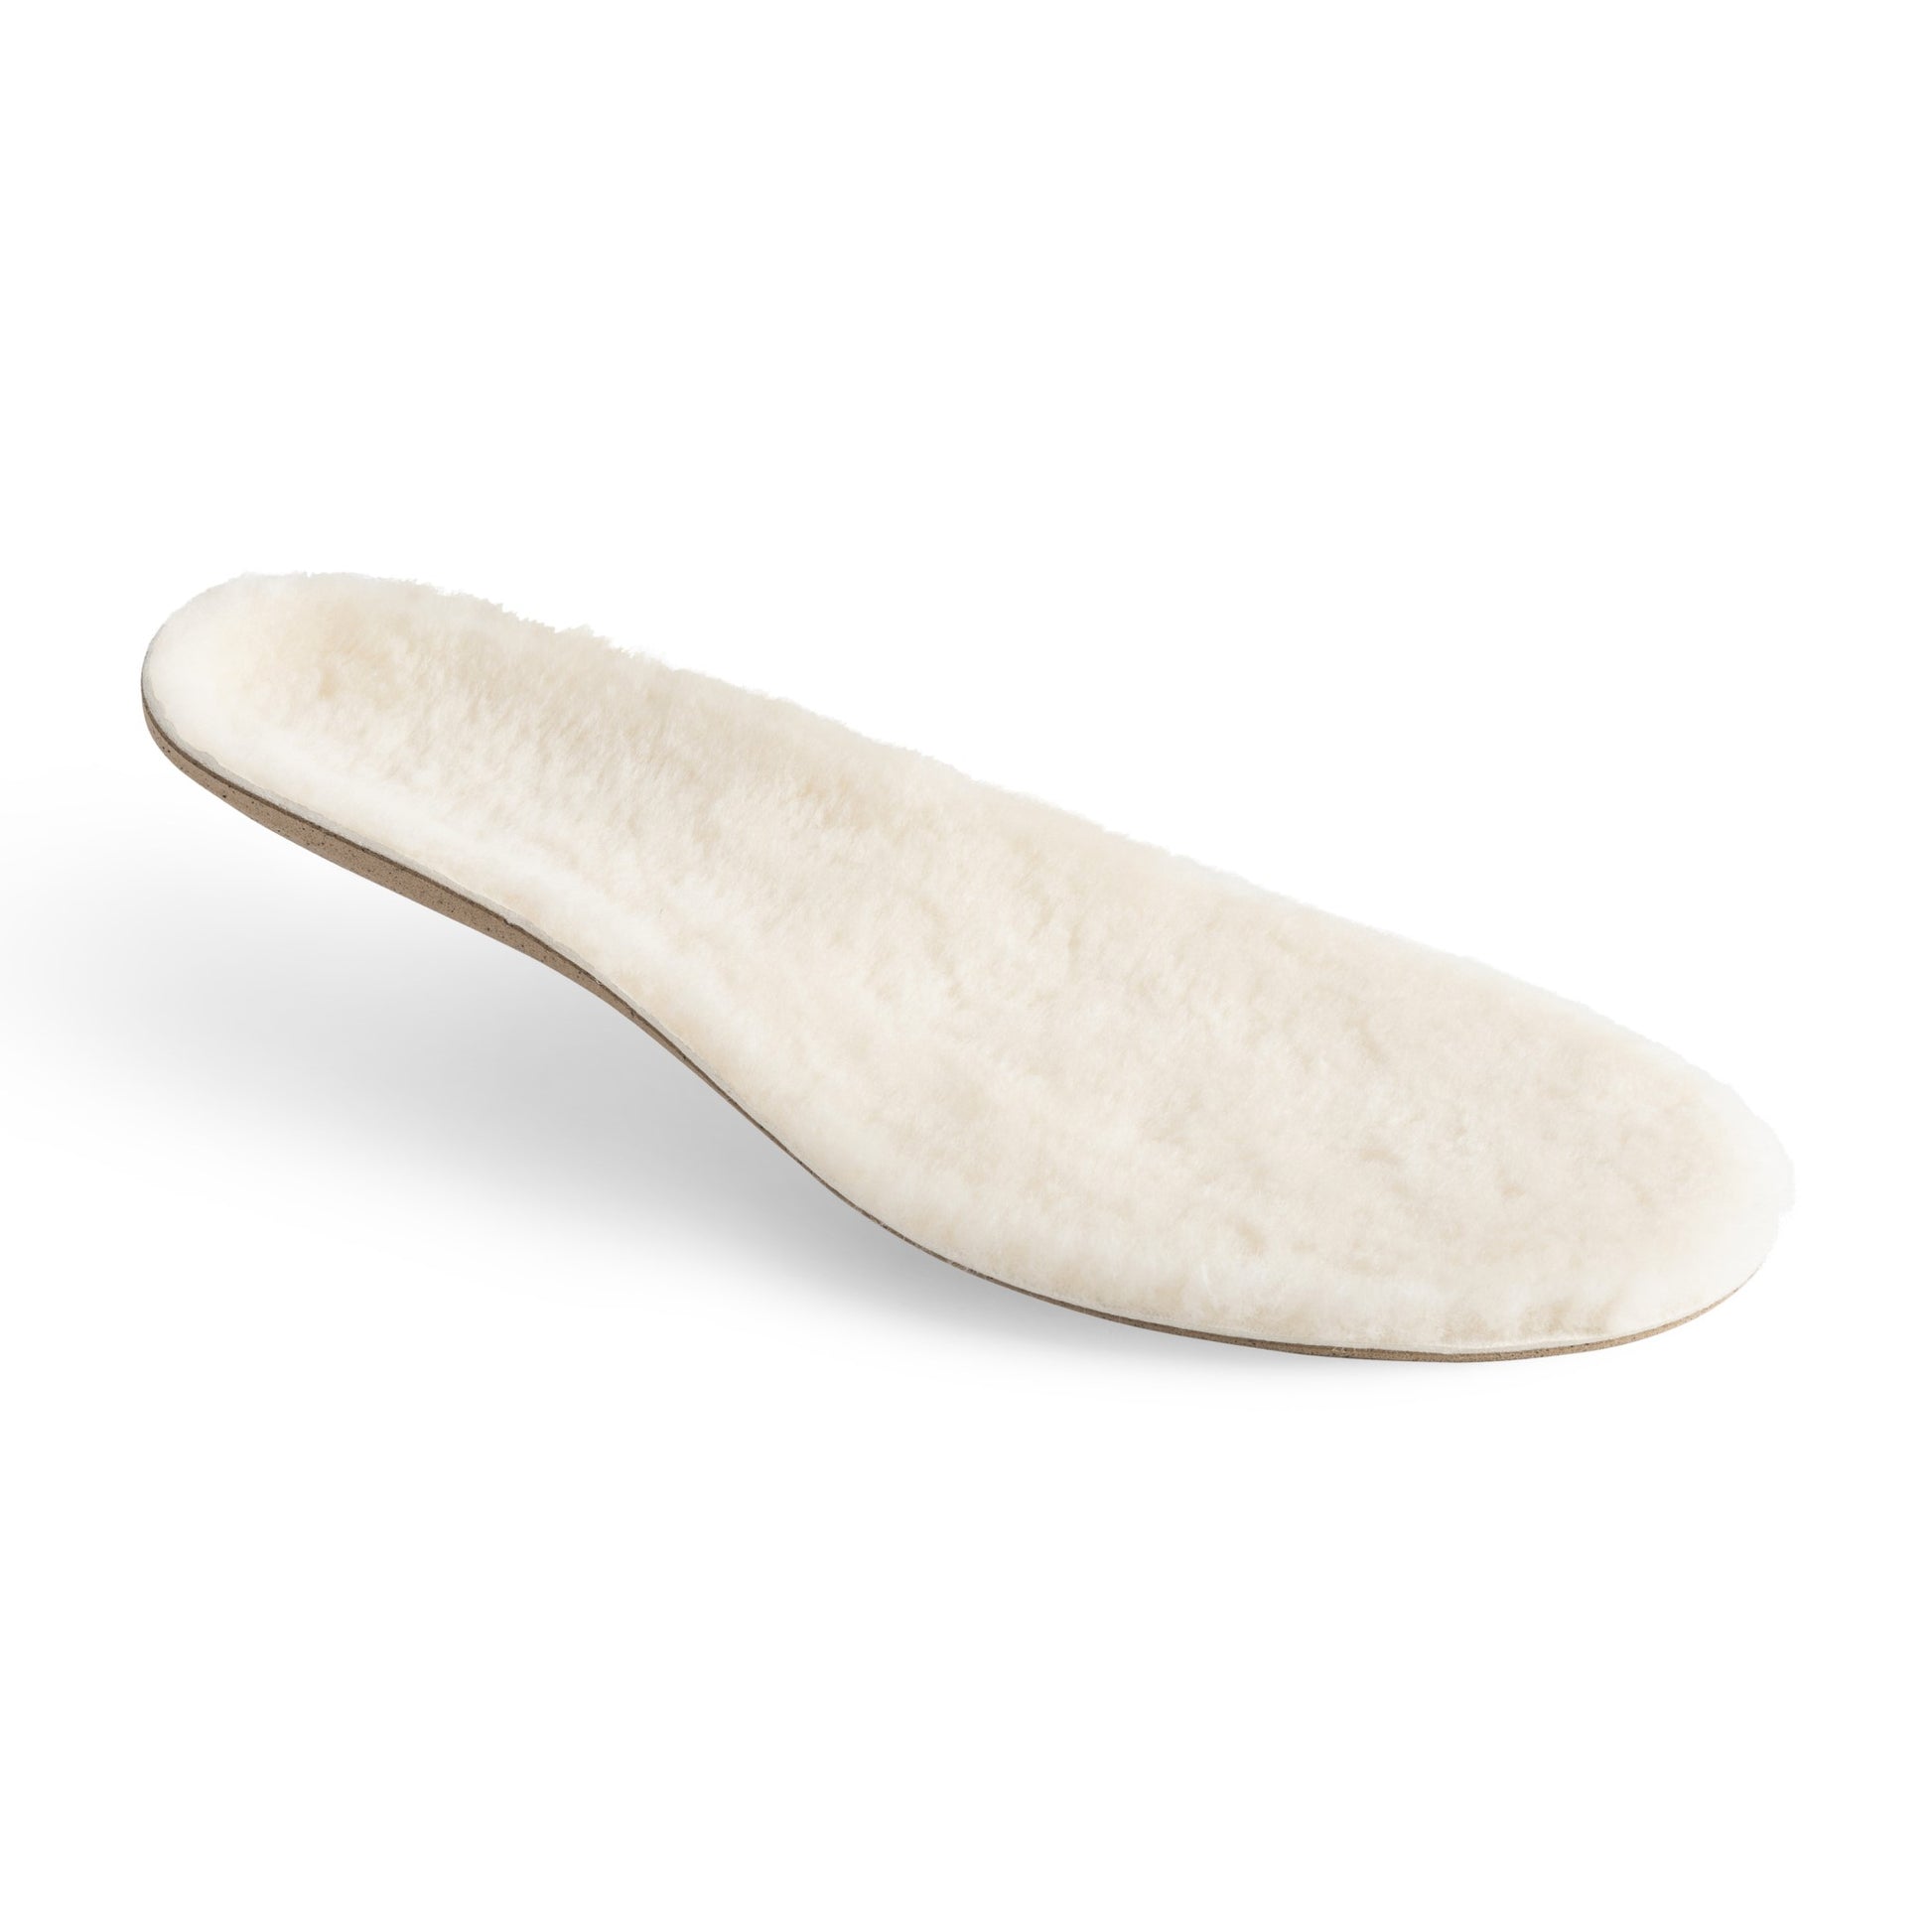 Shearling top covers for Tread Labs orthotics for feet